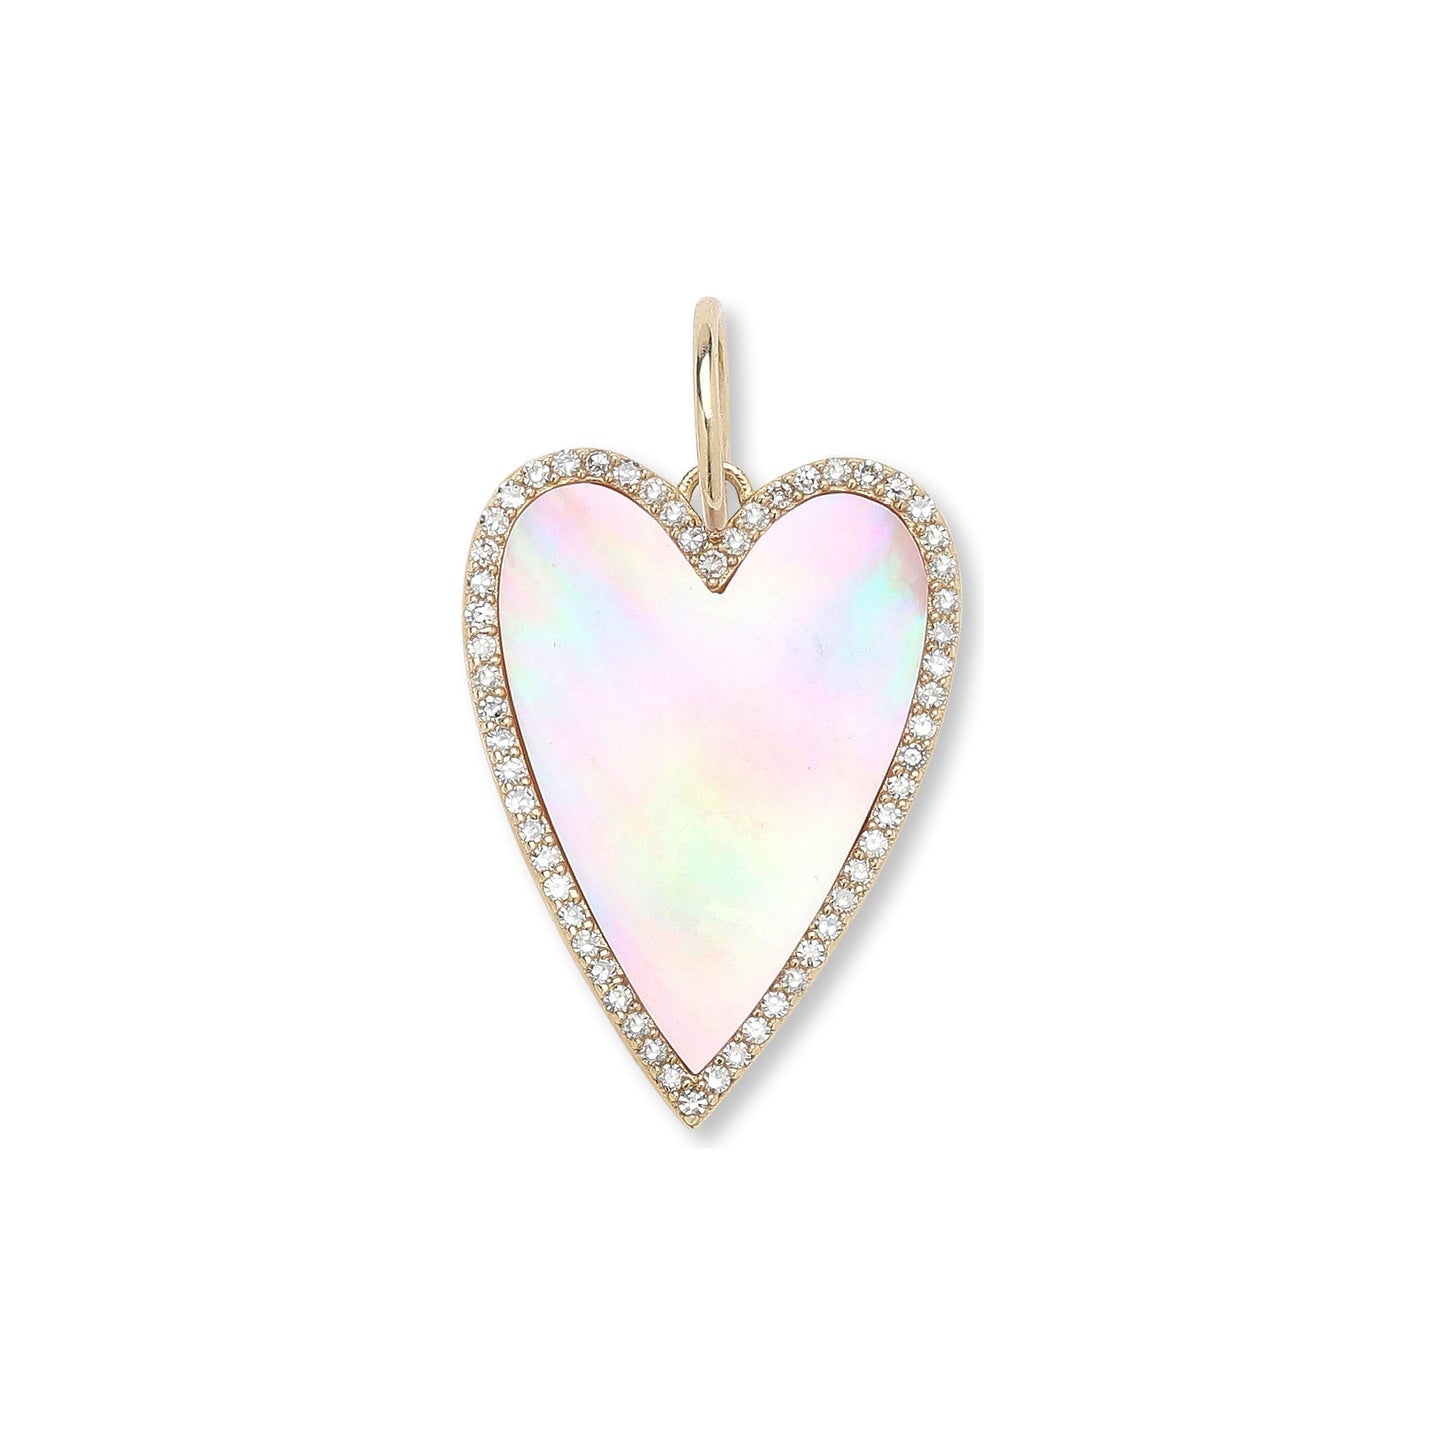 The Pink Pearl Pendant